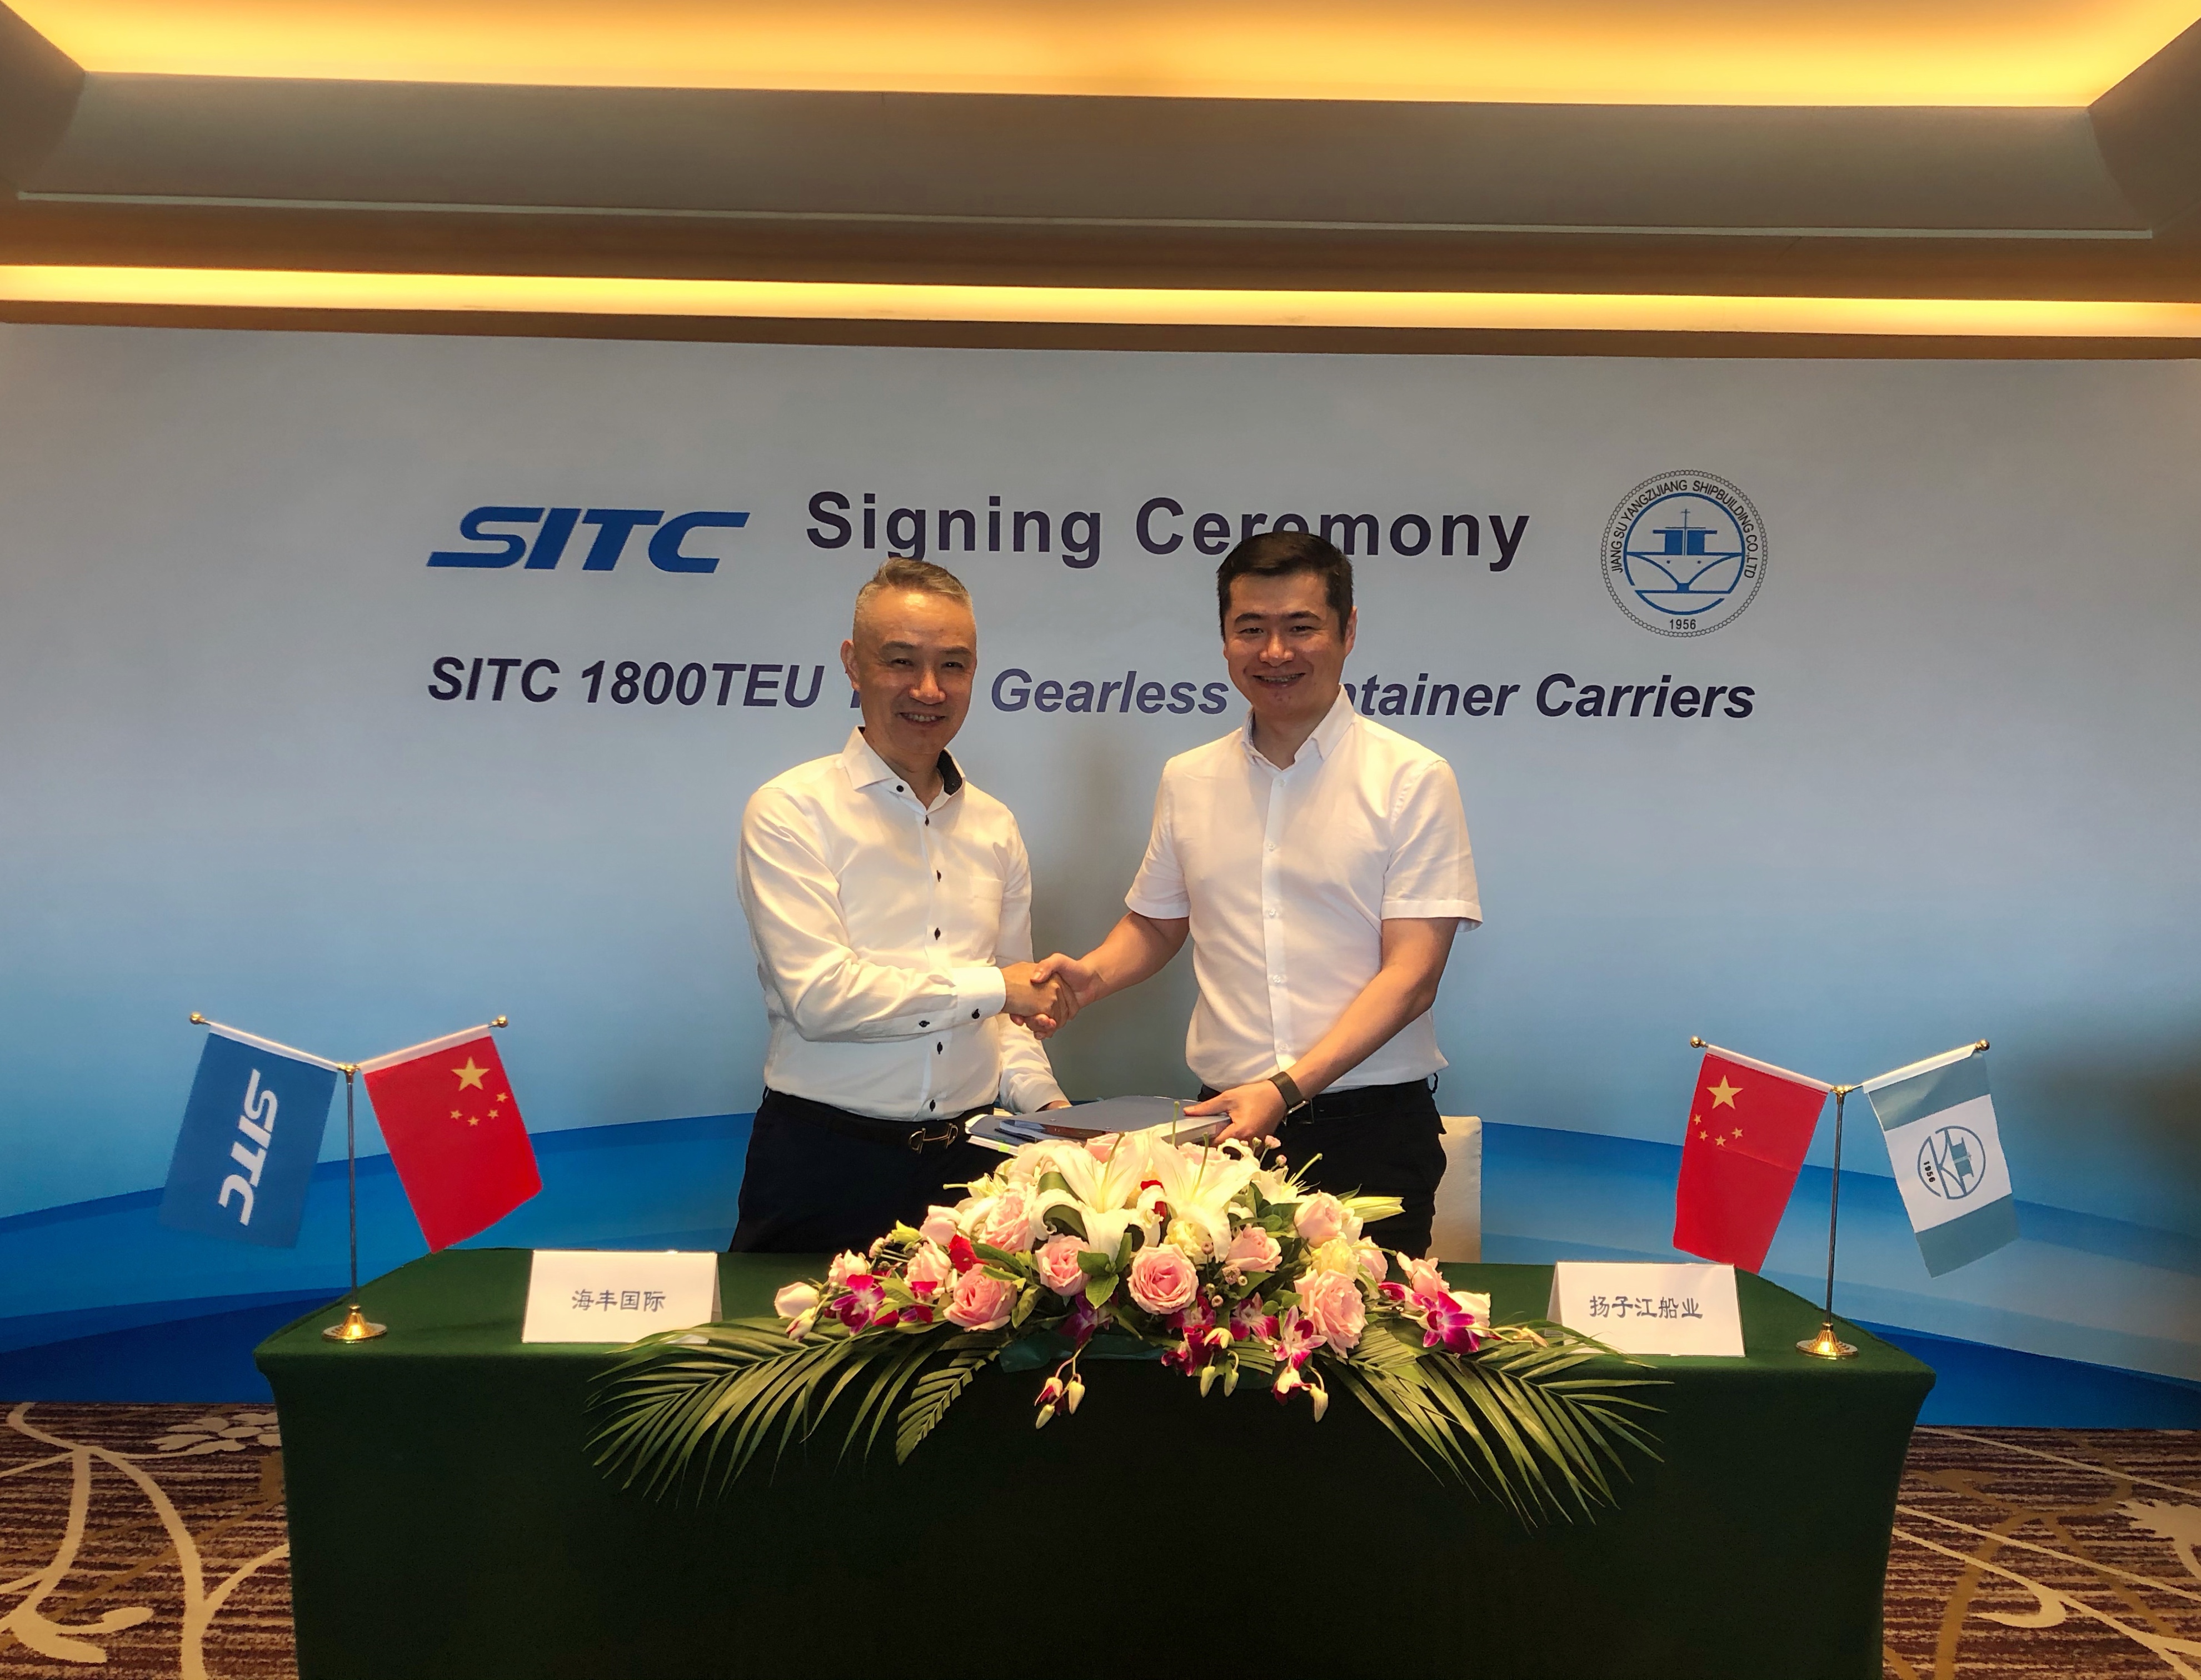 SITC International Deepened Cooperation with Yangzijiang Shipbuilding Group, signing the Newbuilding Contracts for 6 units 1800 TEU Container Carriers and 6 units Option Agreement